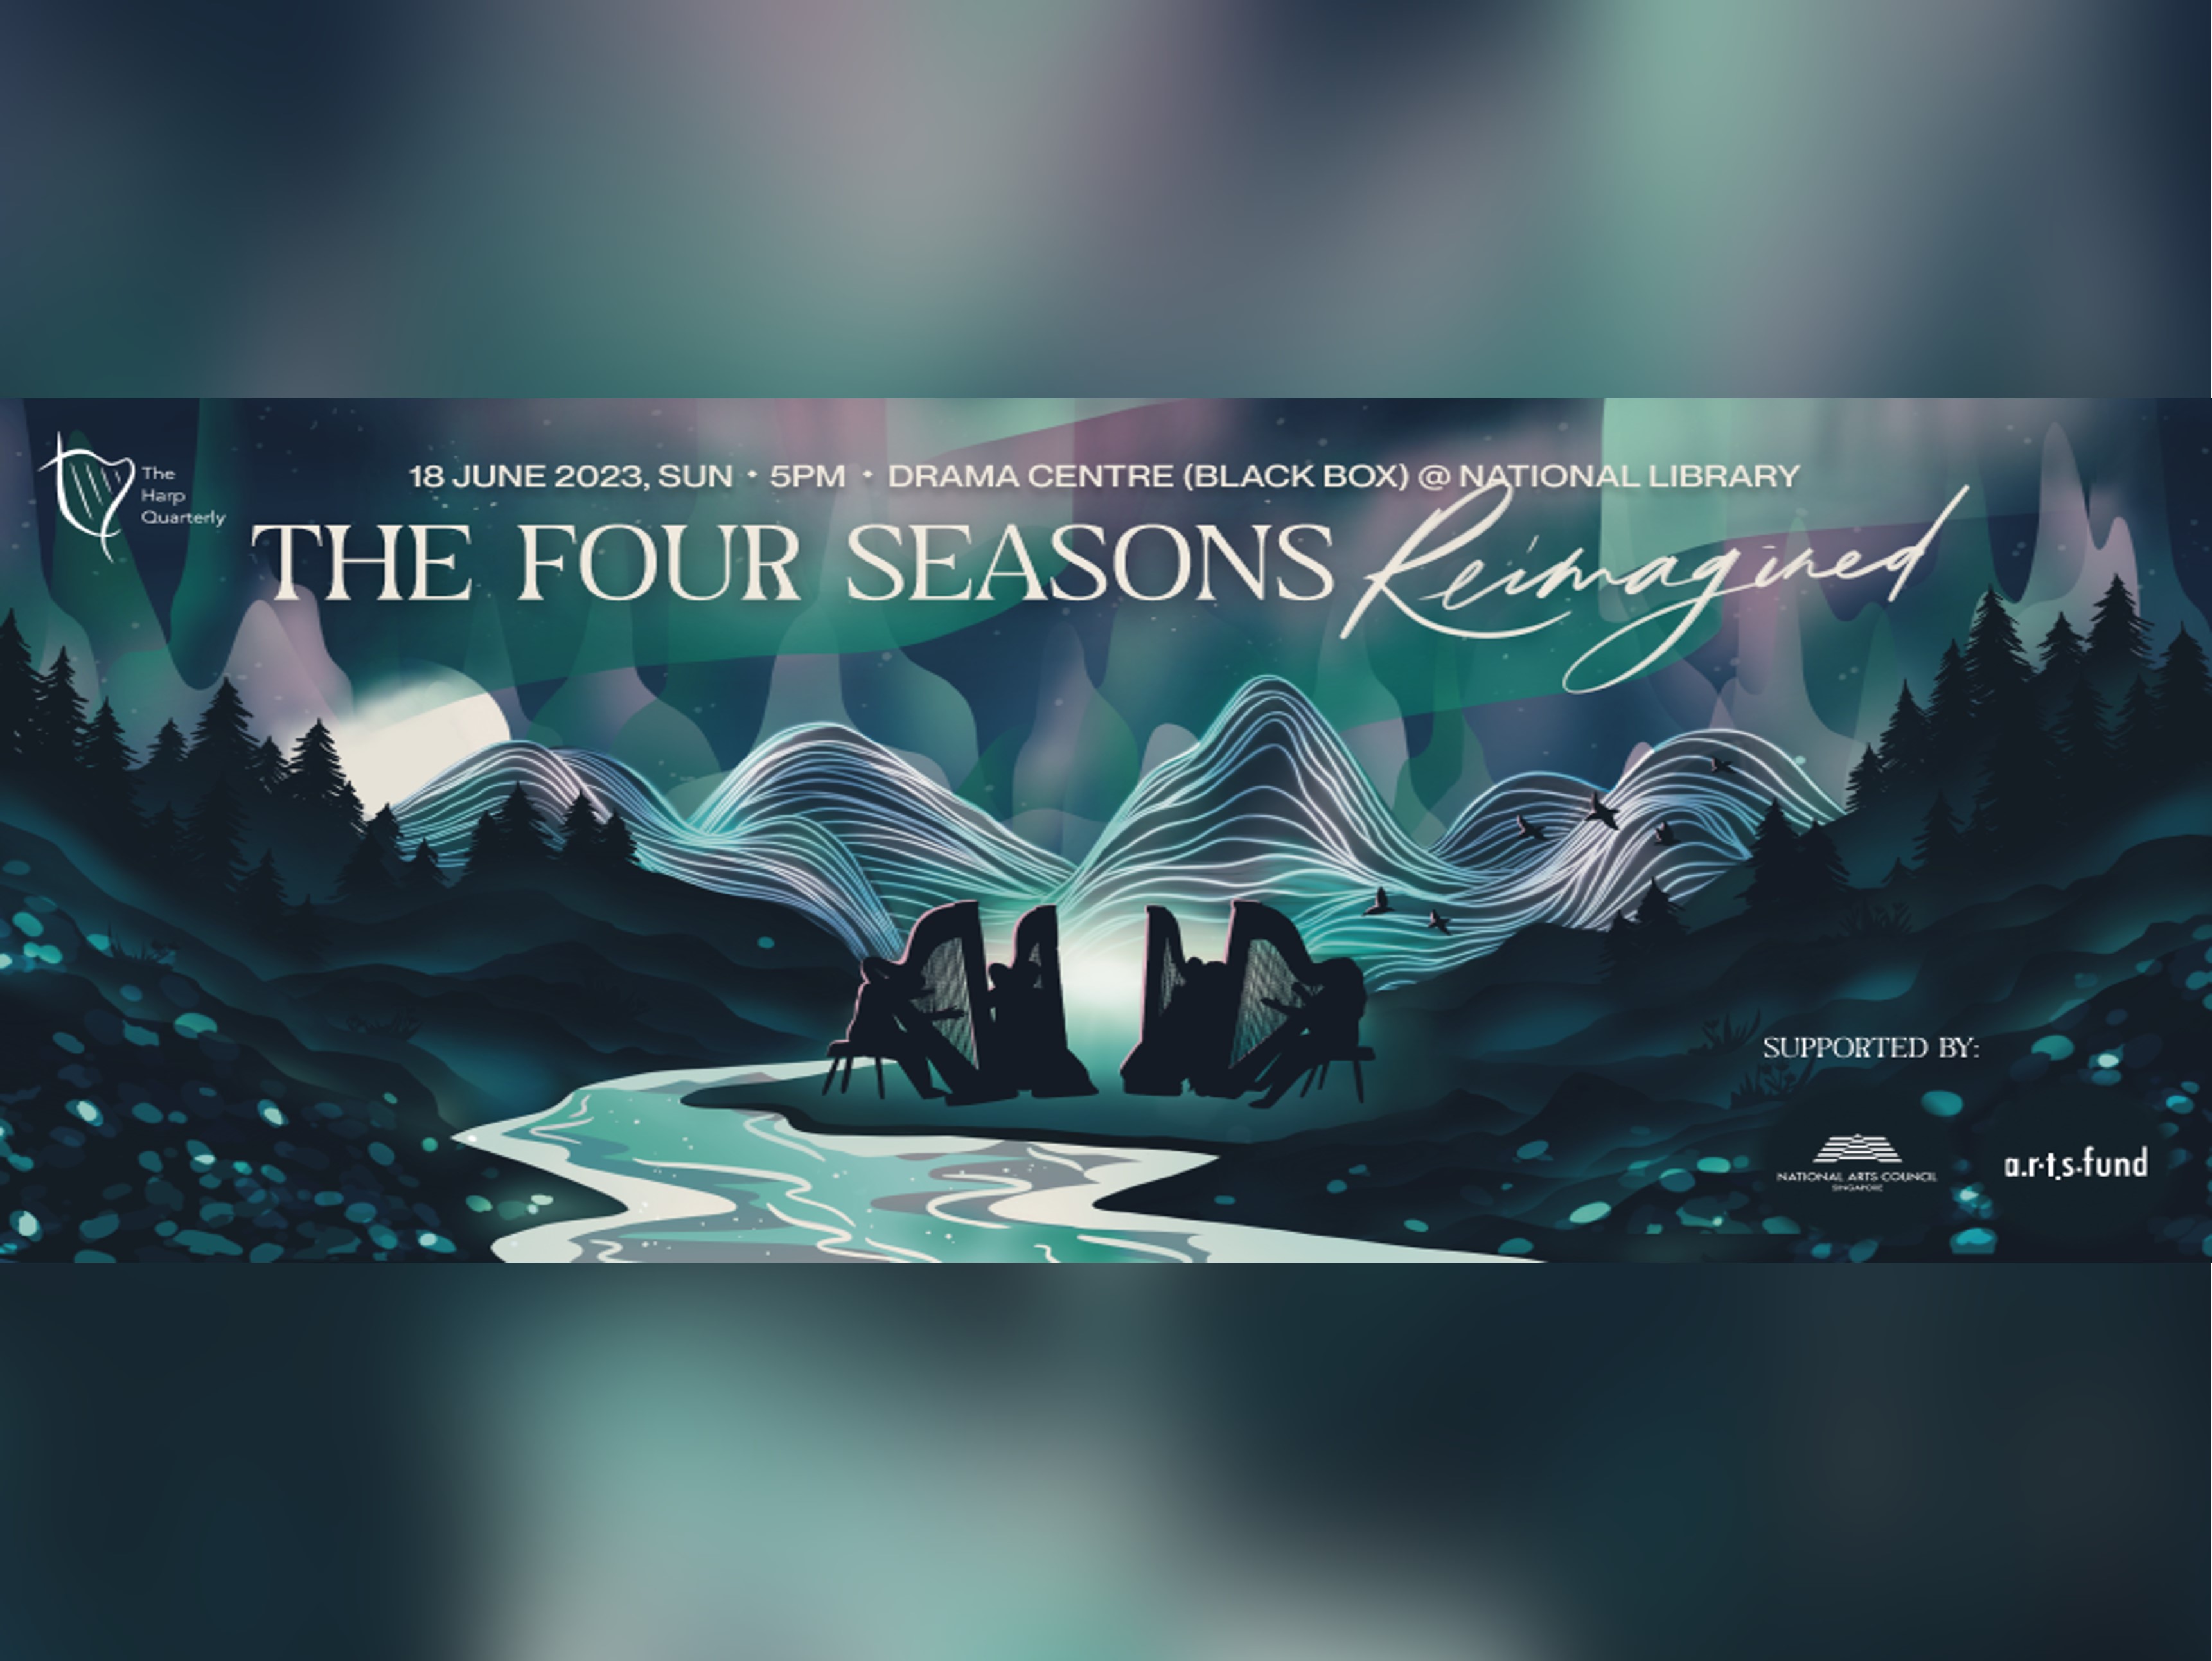 The Four Seasons Reimagined